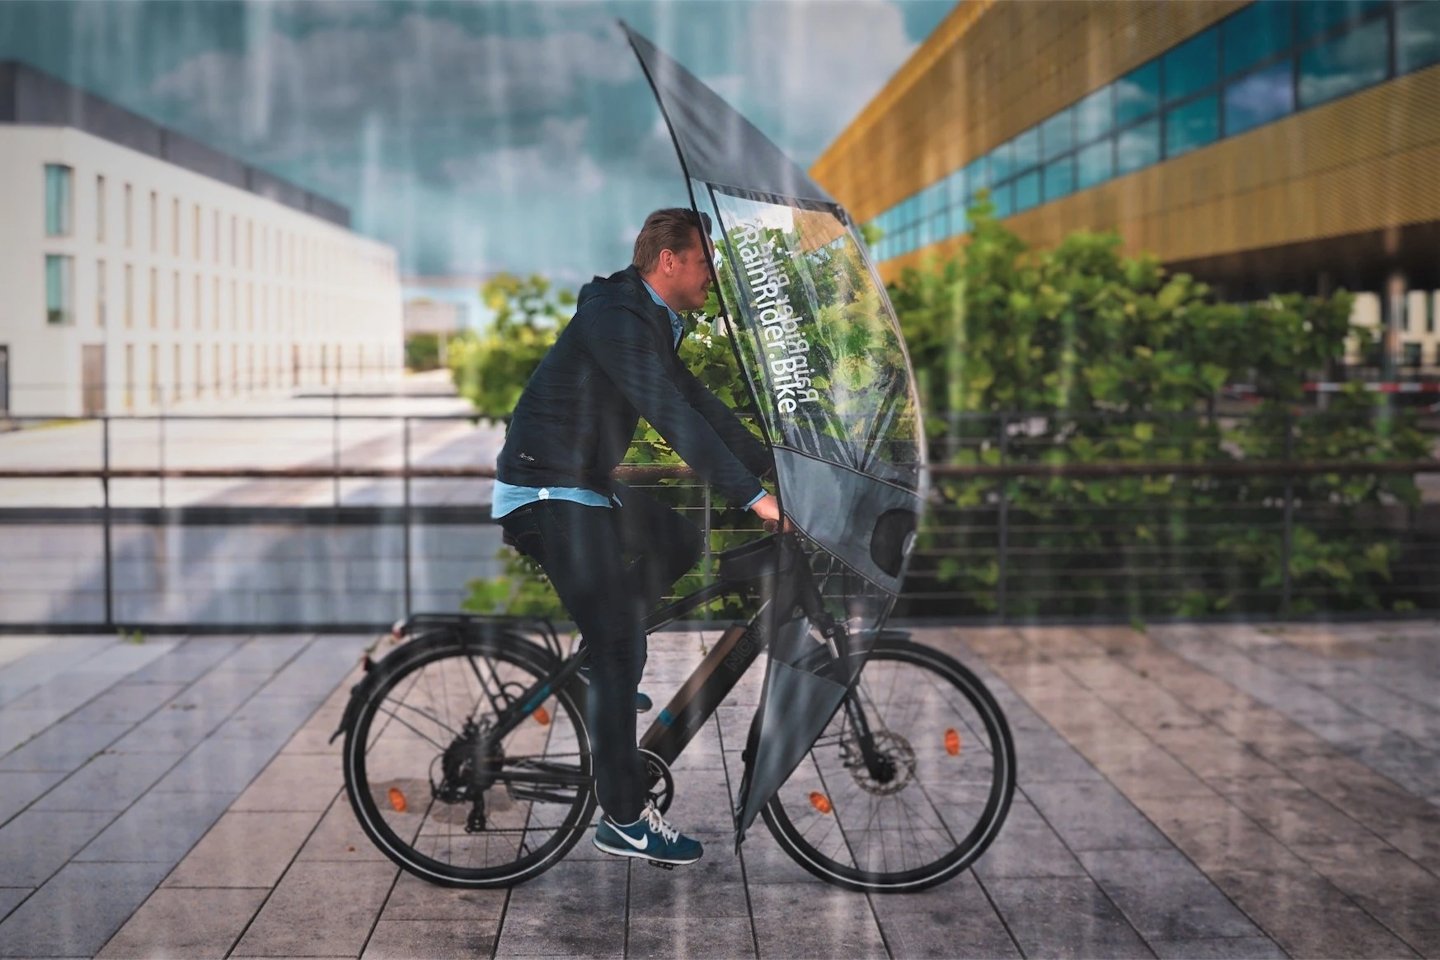 This bike-friendly soft-top umbrella is designed to keep cyclists clean and dry on rainy days!